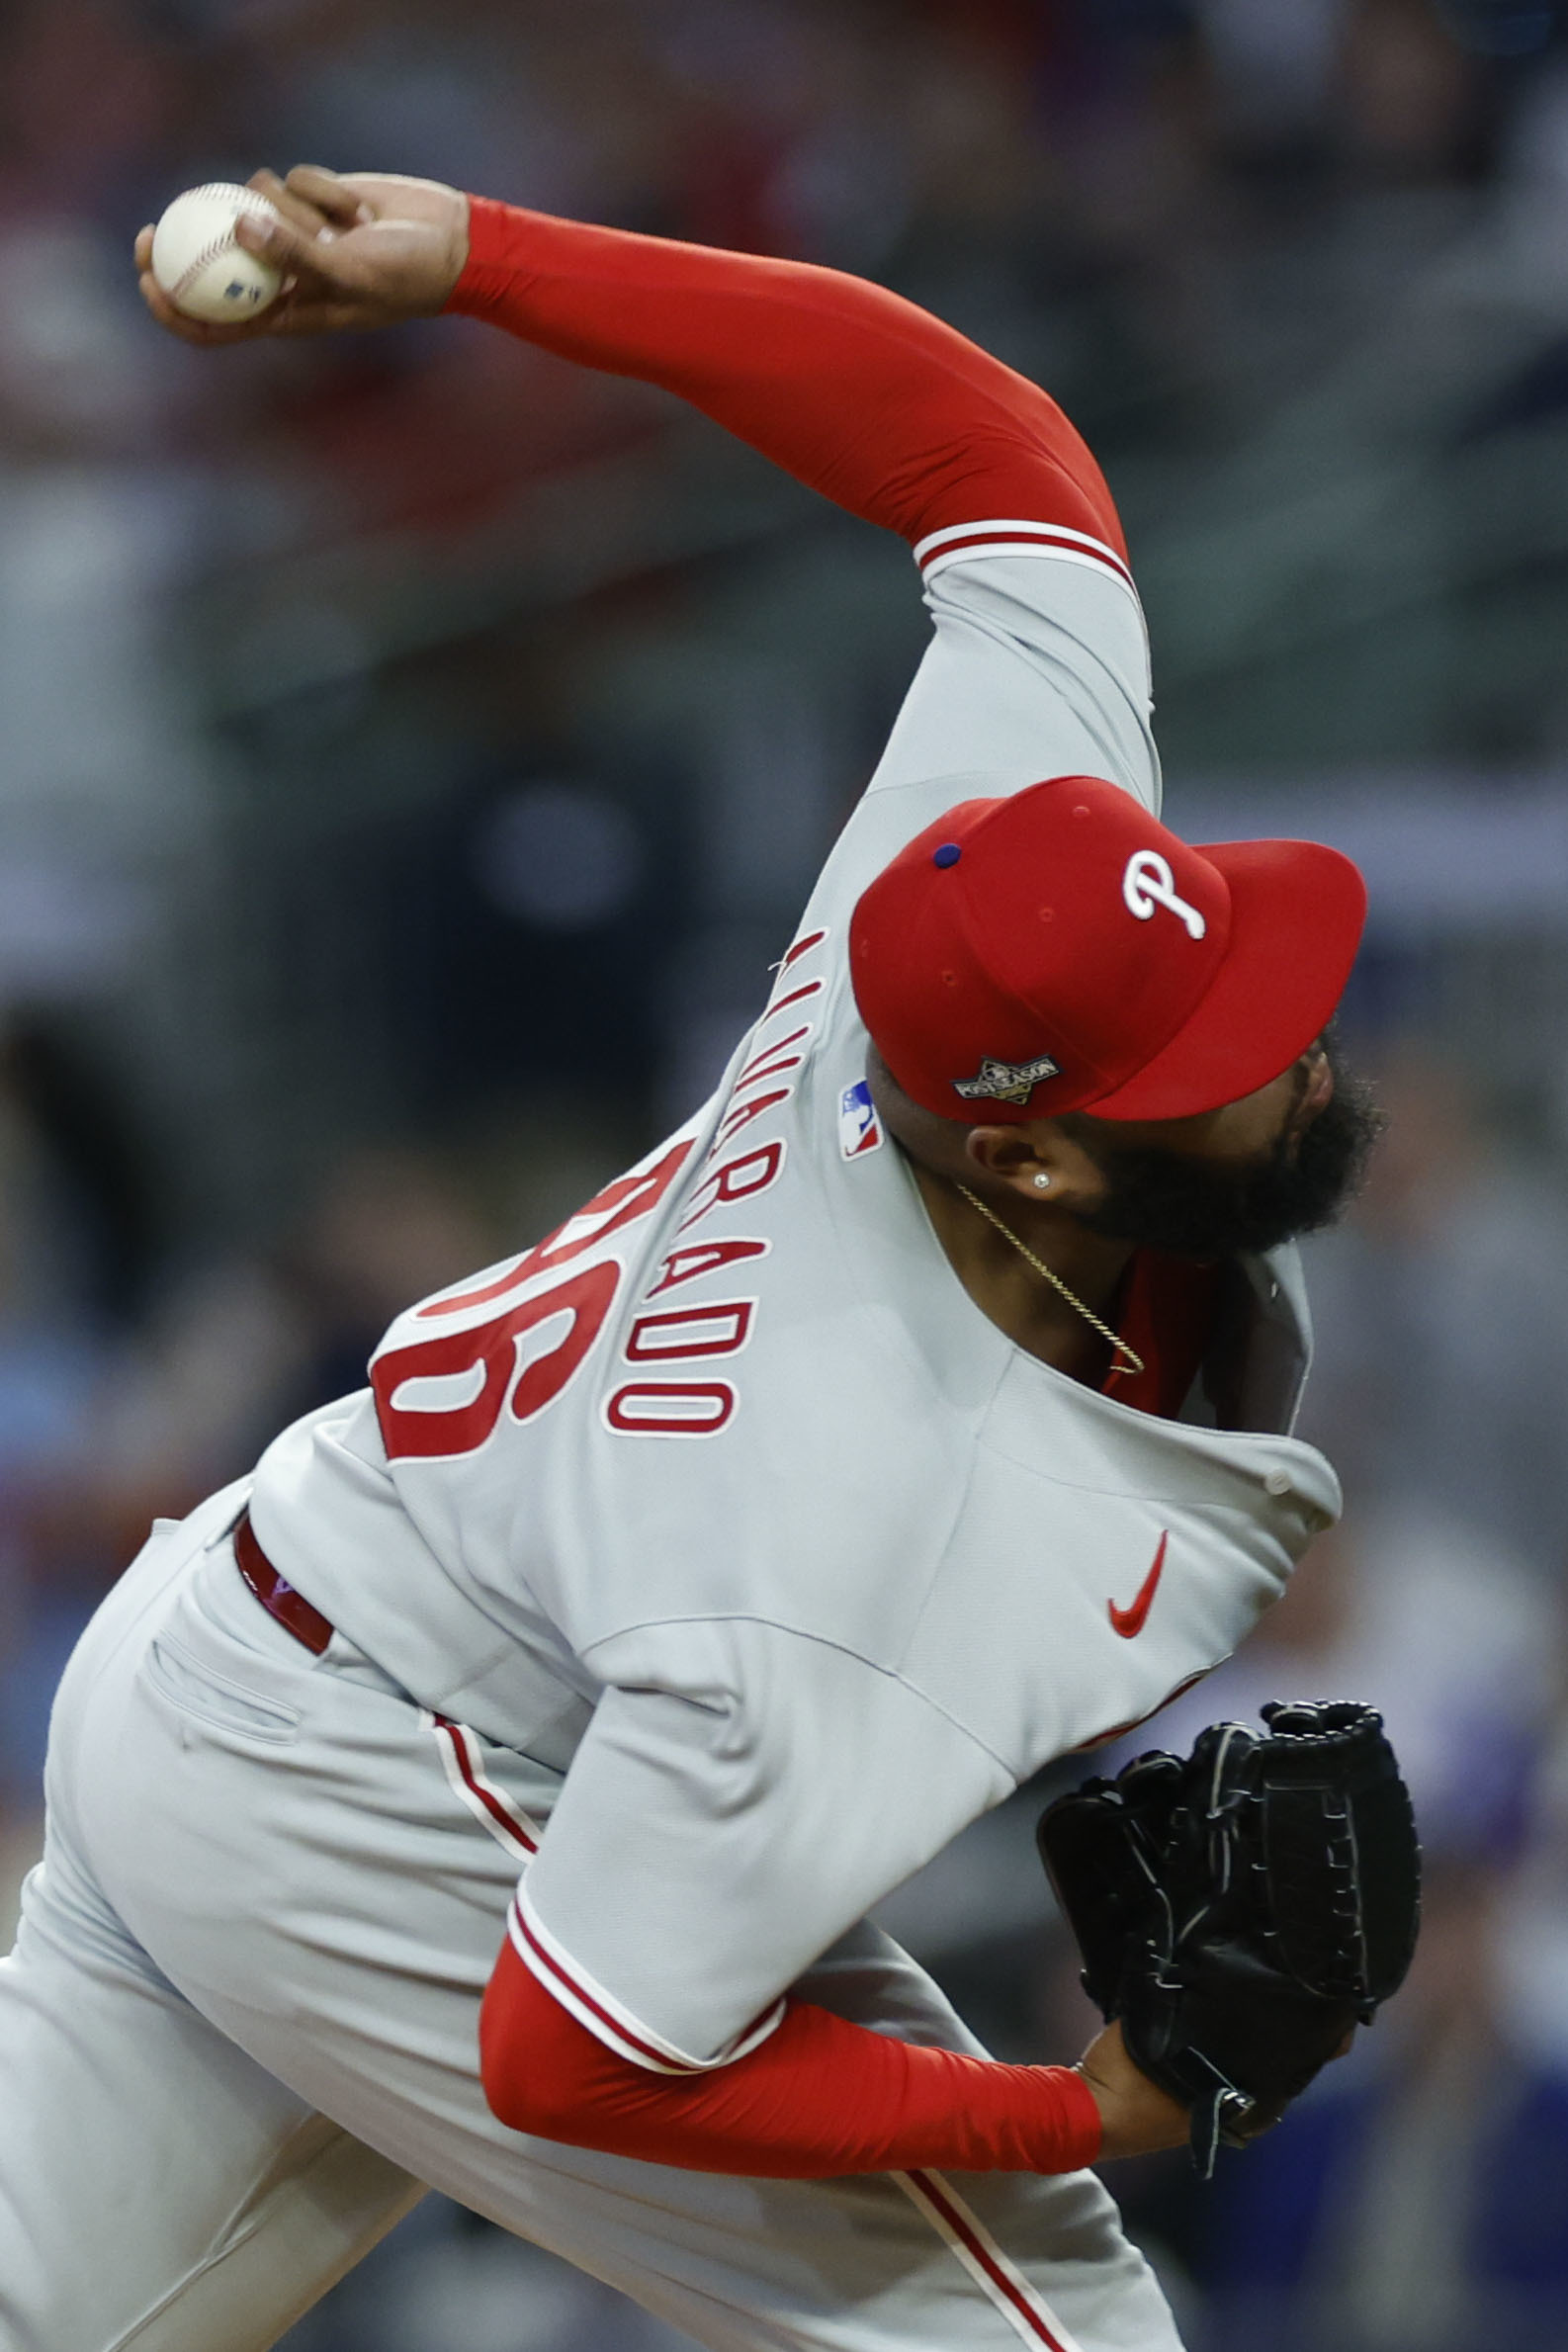 Phillies blank Braves 3-0 to win Game 1 of the NLDS